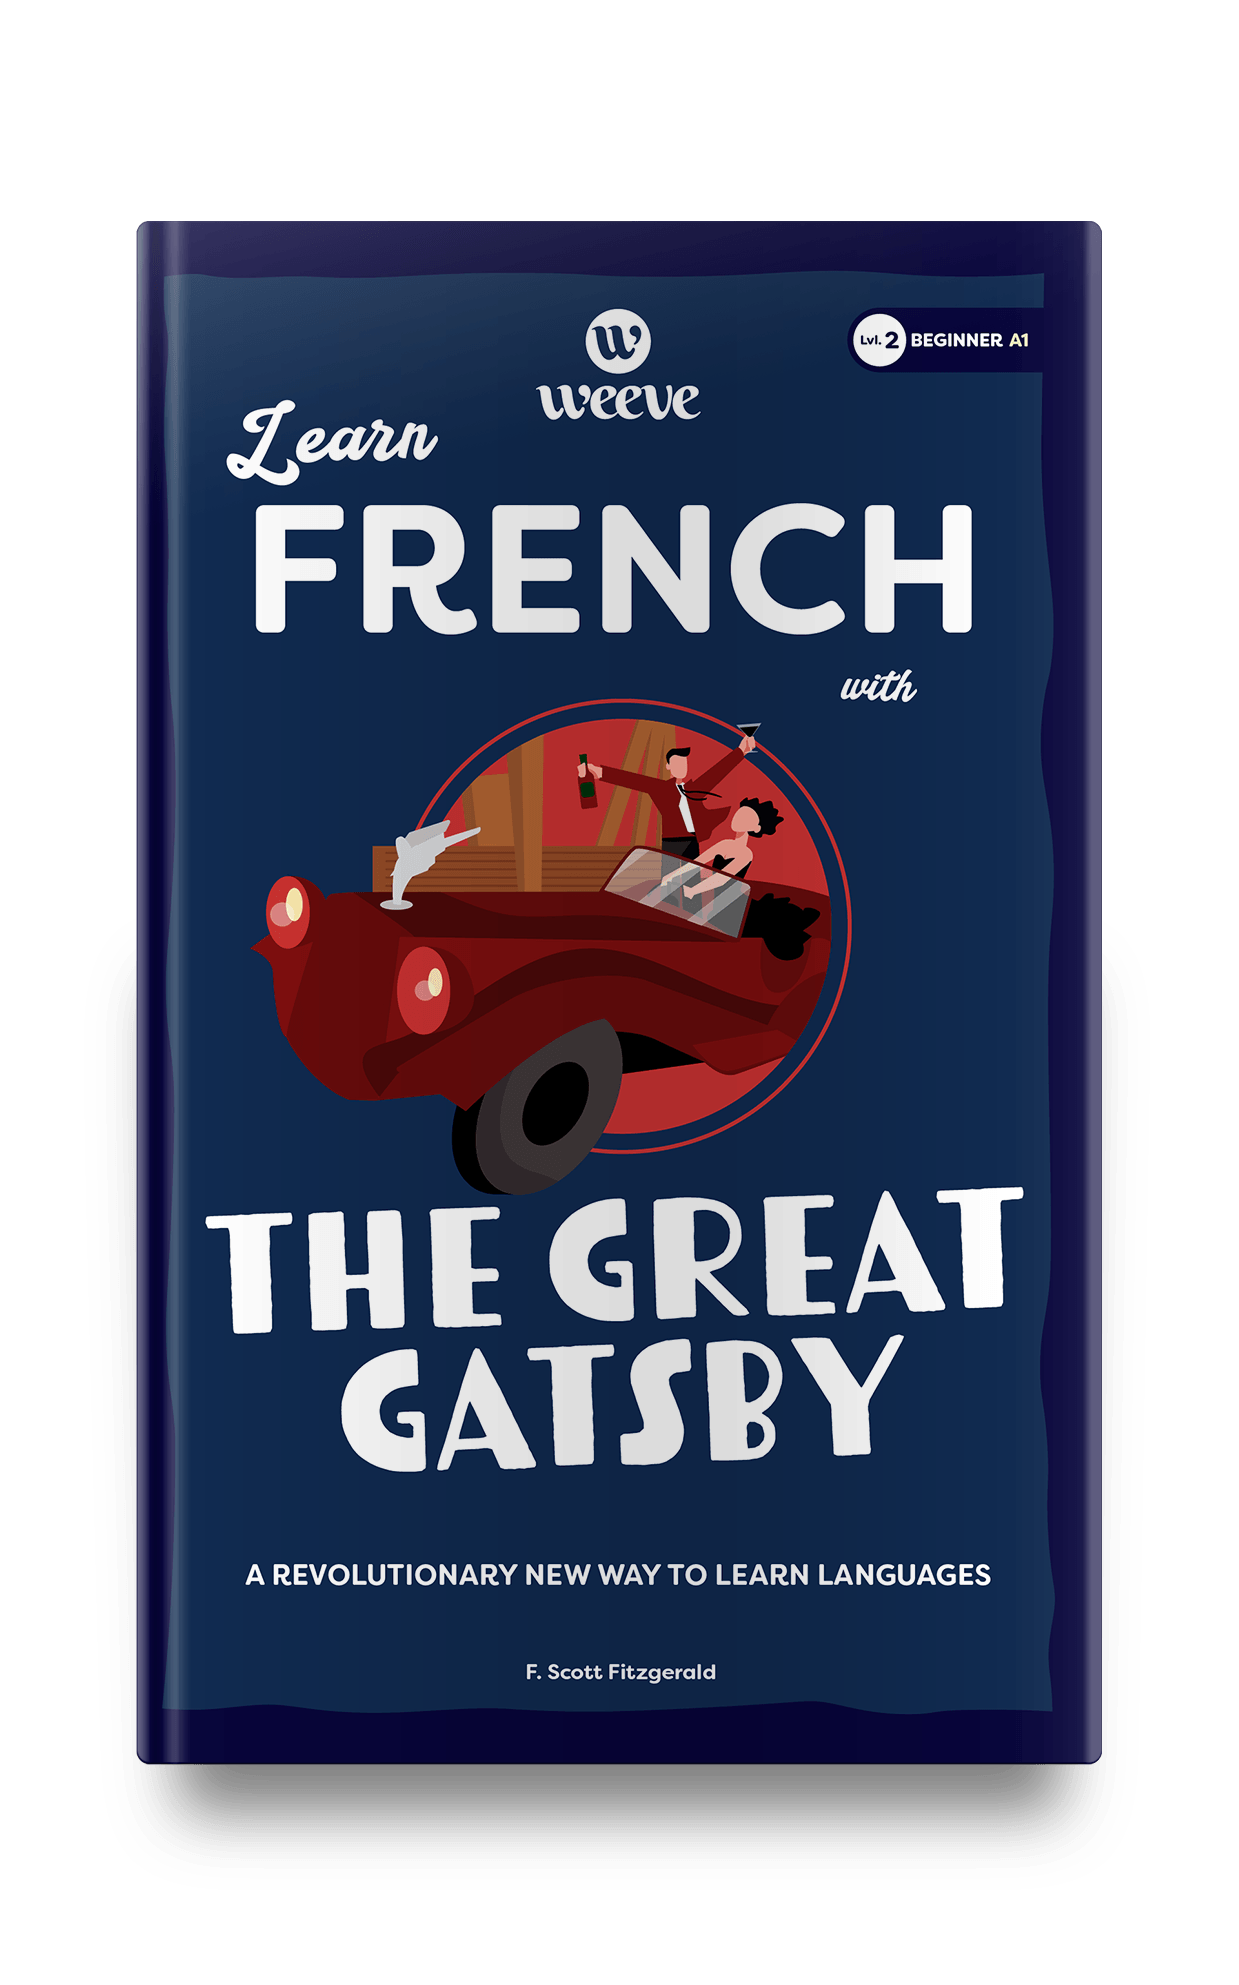 Learn French with The Great Gatsby - Weeve